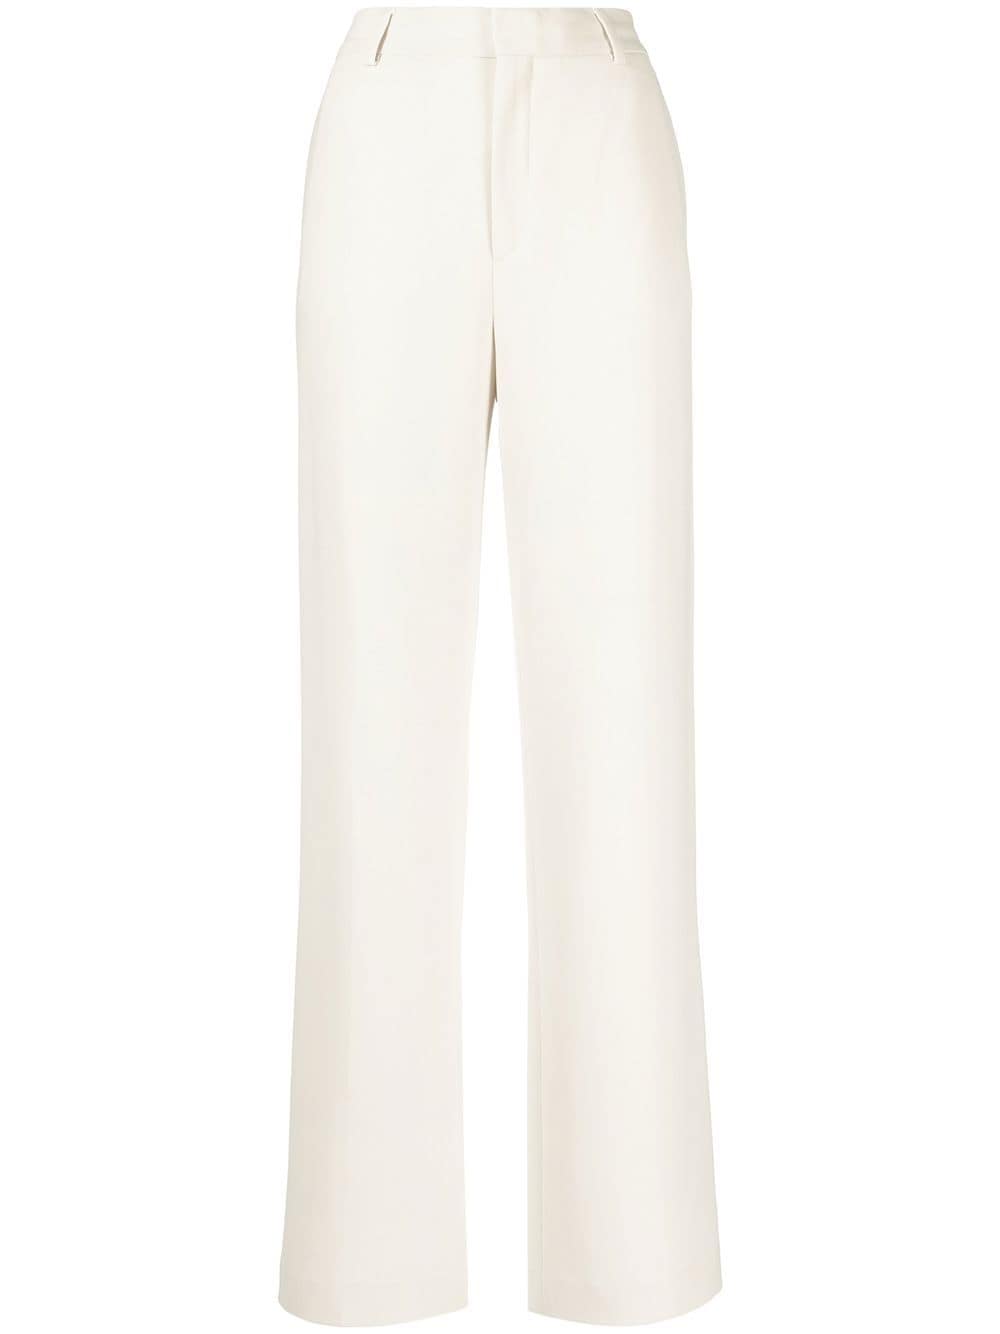 Hutton tailored trousers